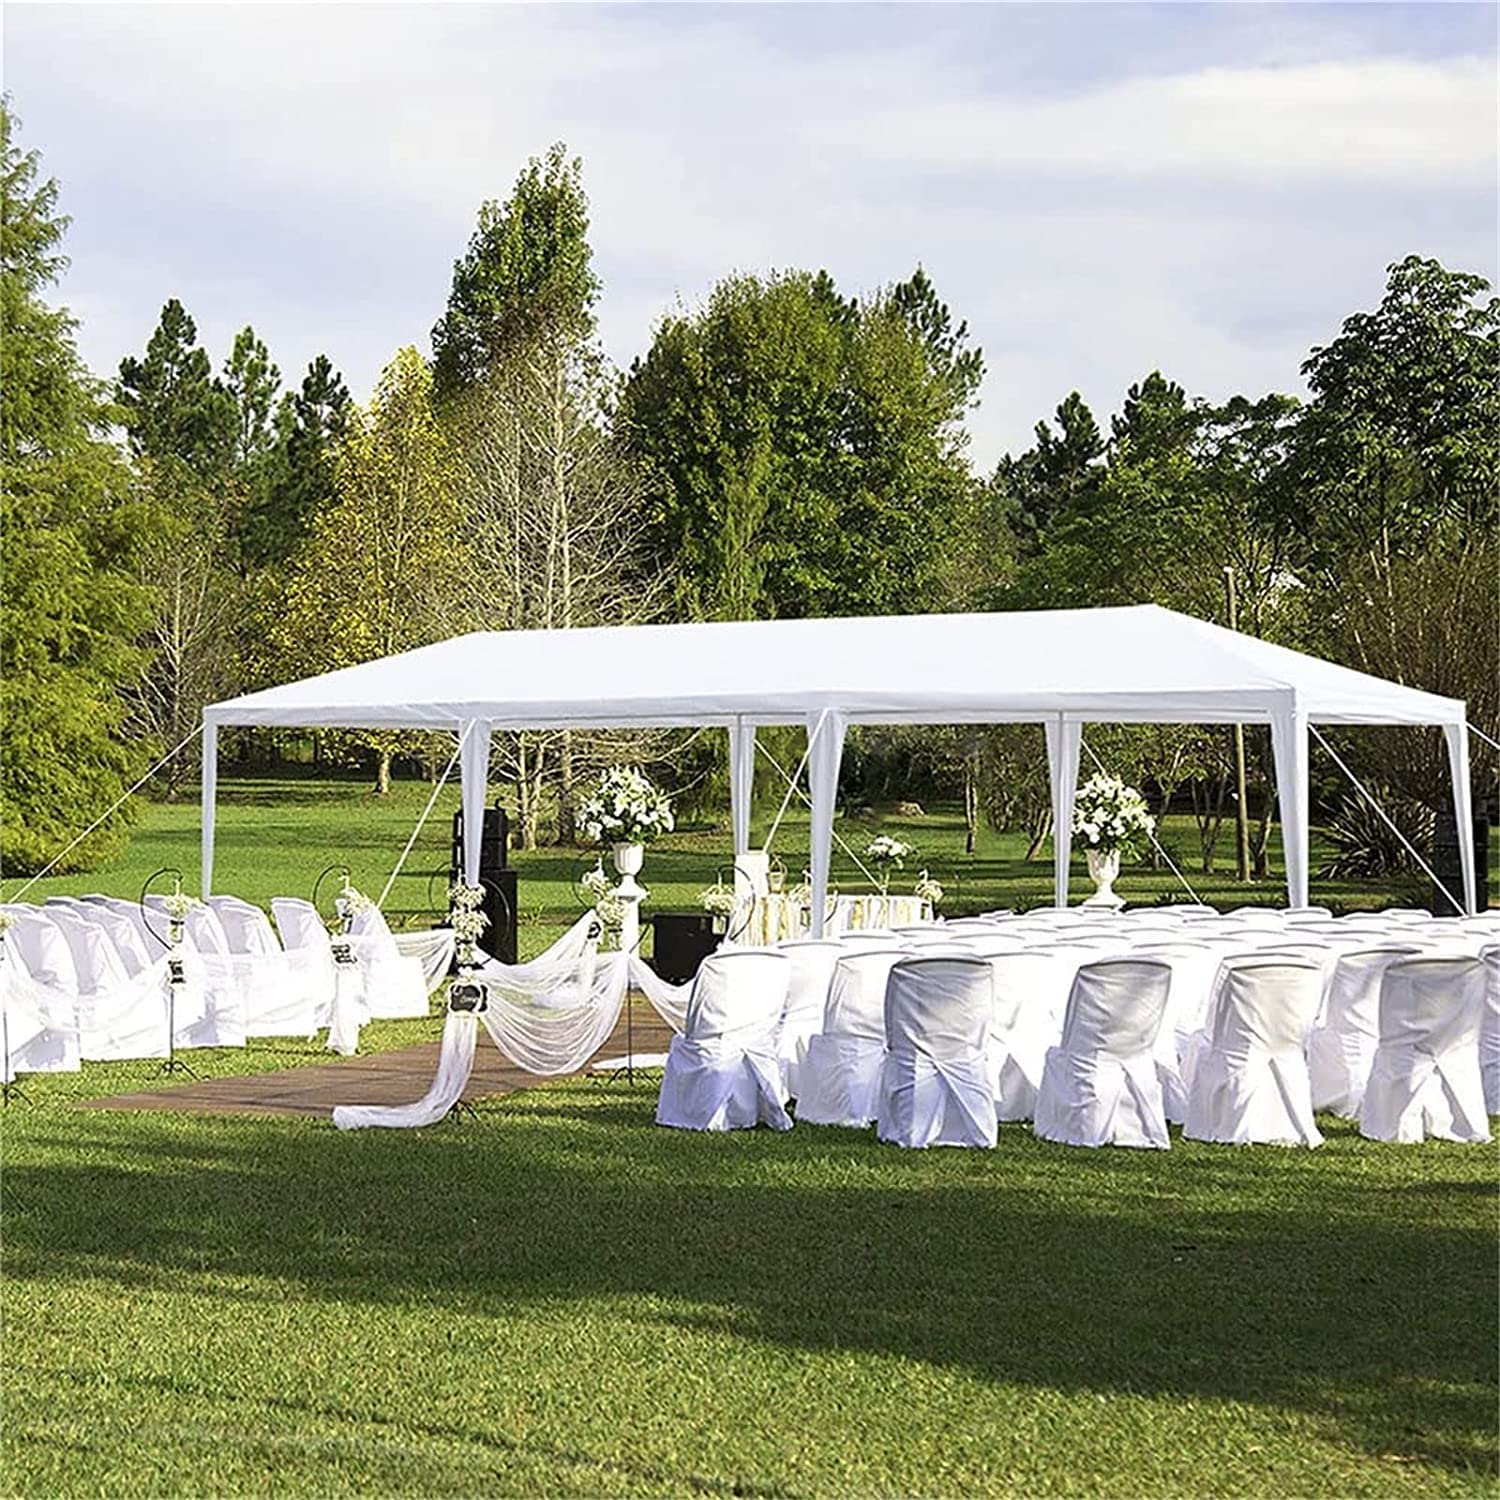 Fujampe 10x30 Party Tent Waterproof Outdoor Canopy Tent White Wedding Tents for Parties BBQ Patio Gazebo Shelter Canopy Events Tent with 5 Sidewalls (10' x 30' with 5 Side Walls)